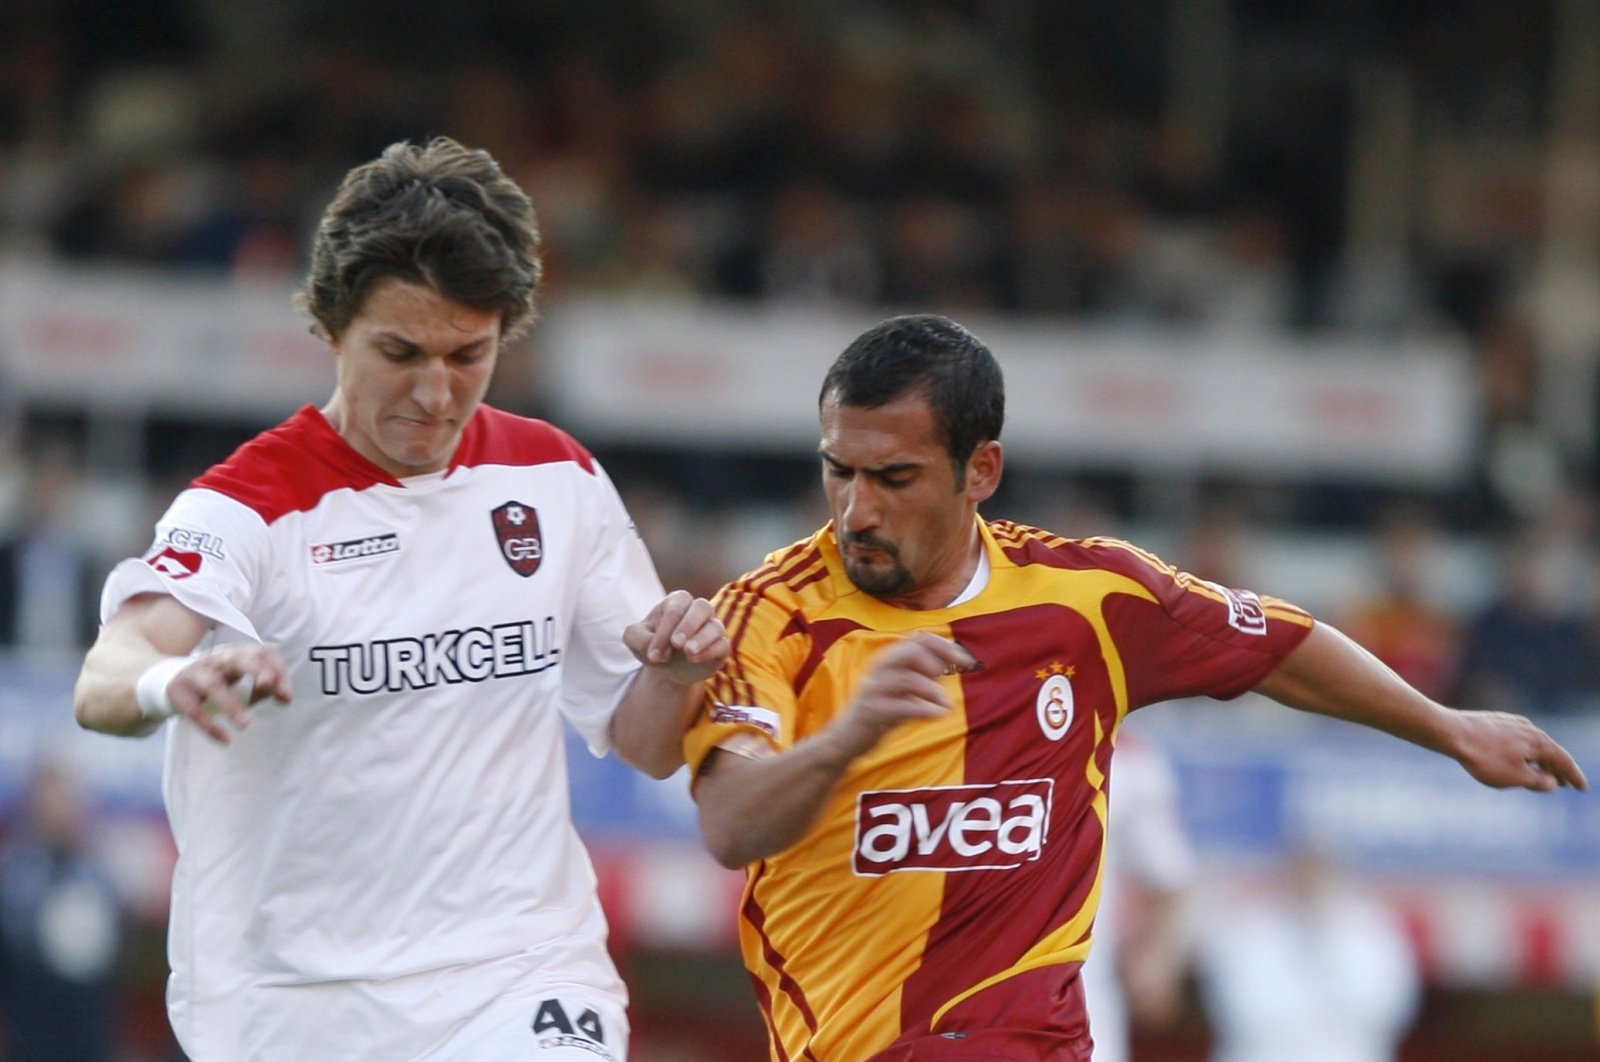 Cevher Toktaş (L) in action against Galatasaray&#039;s Ümit Karan, during a match between Gençlerbirliği Oftaş and Galatasaray, in Istanbul, Turkey, May 10, 2008. (REUTERS PHOTO) 